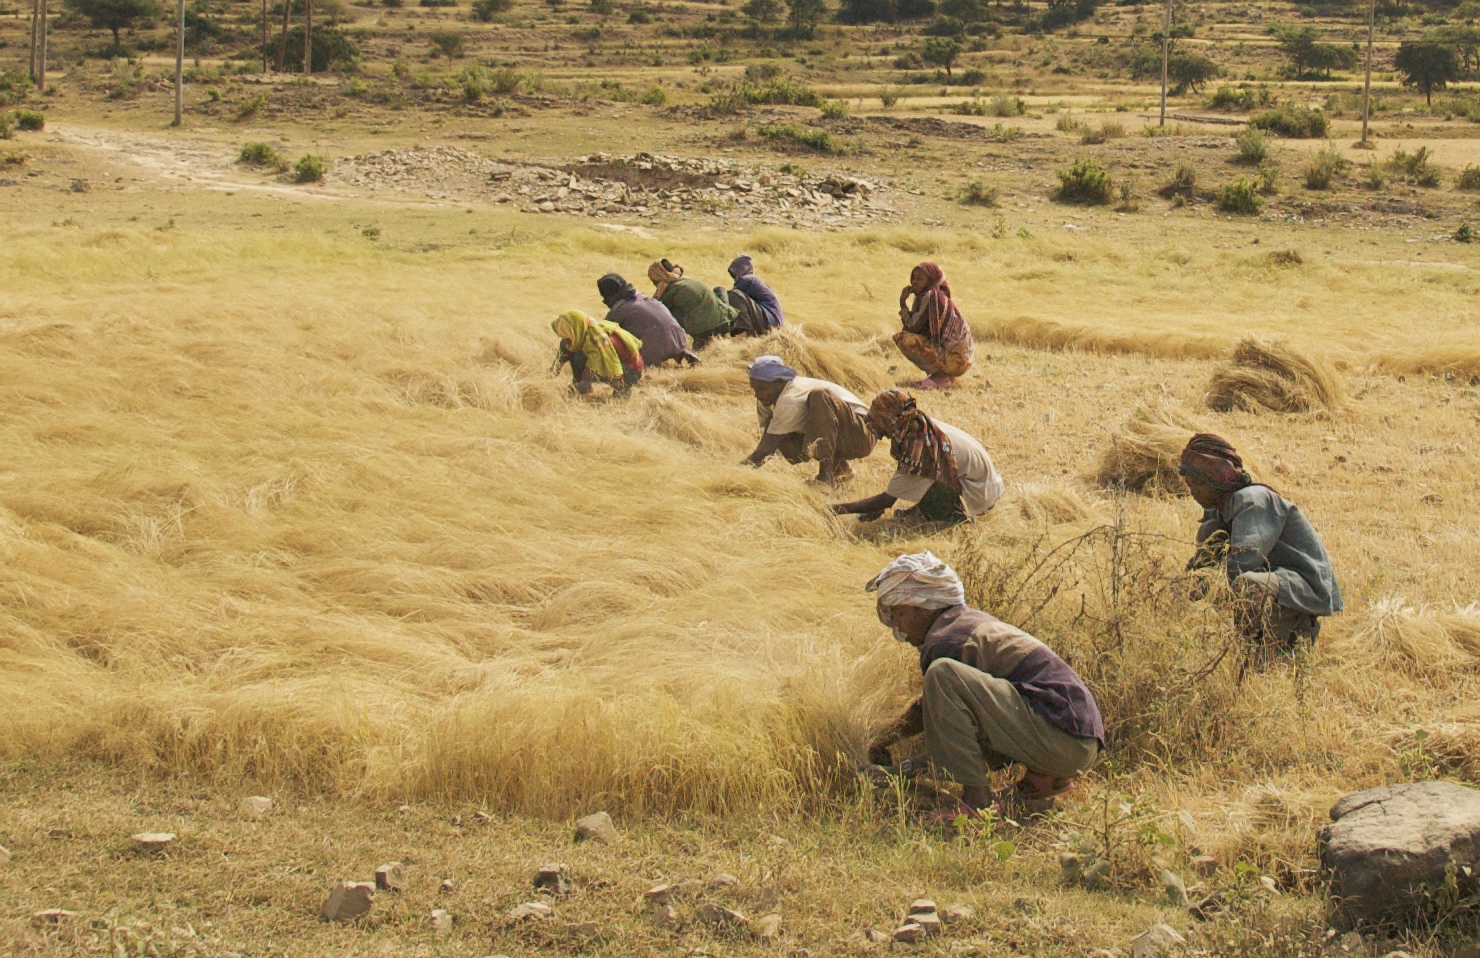 Men and women harvest the Ethiopian staple grain teff in a roadside field between Axum and Adwa in Northern Ethiopia. / Ethiopian protests